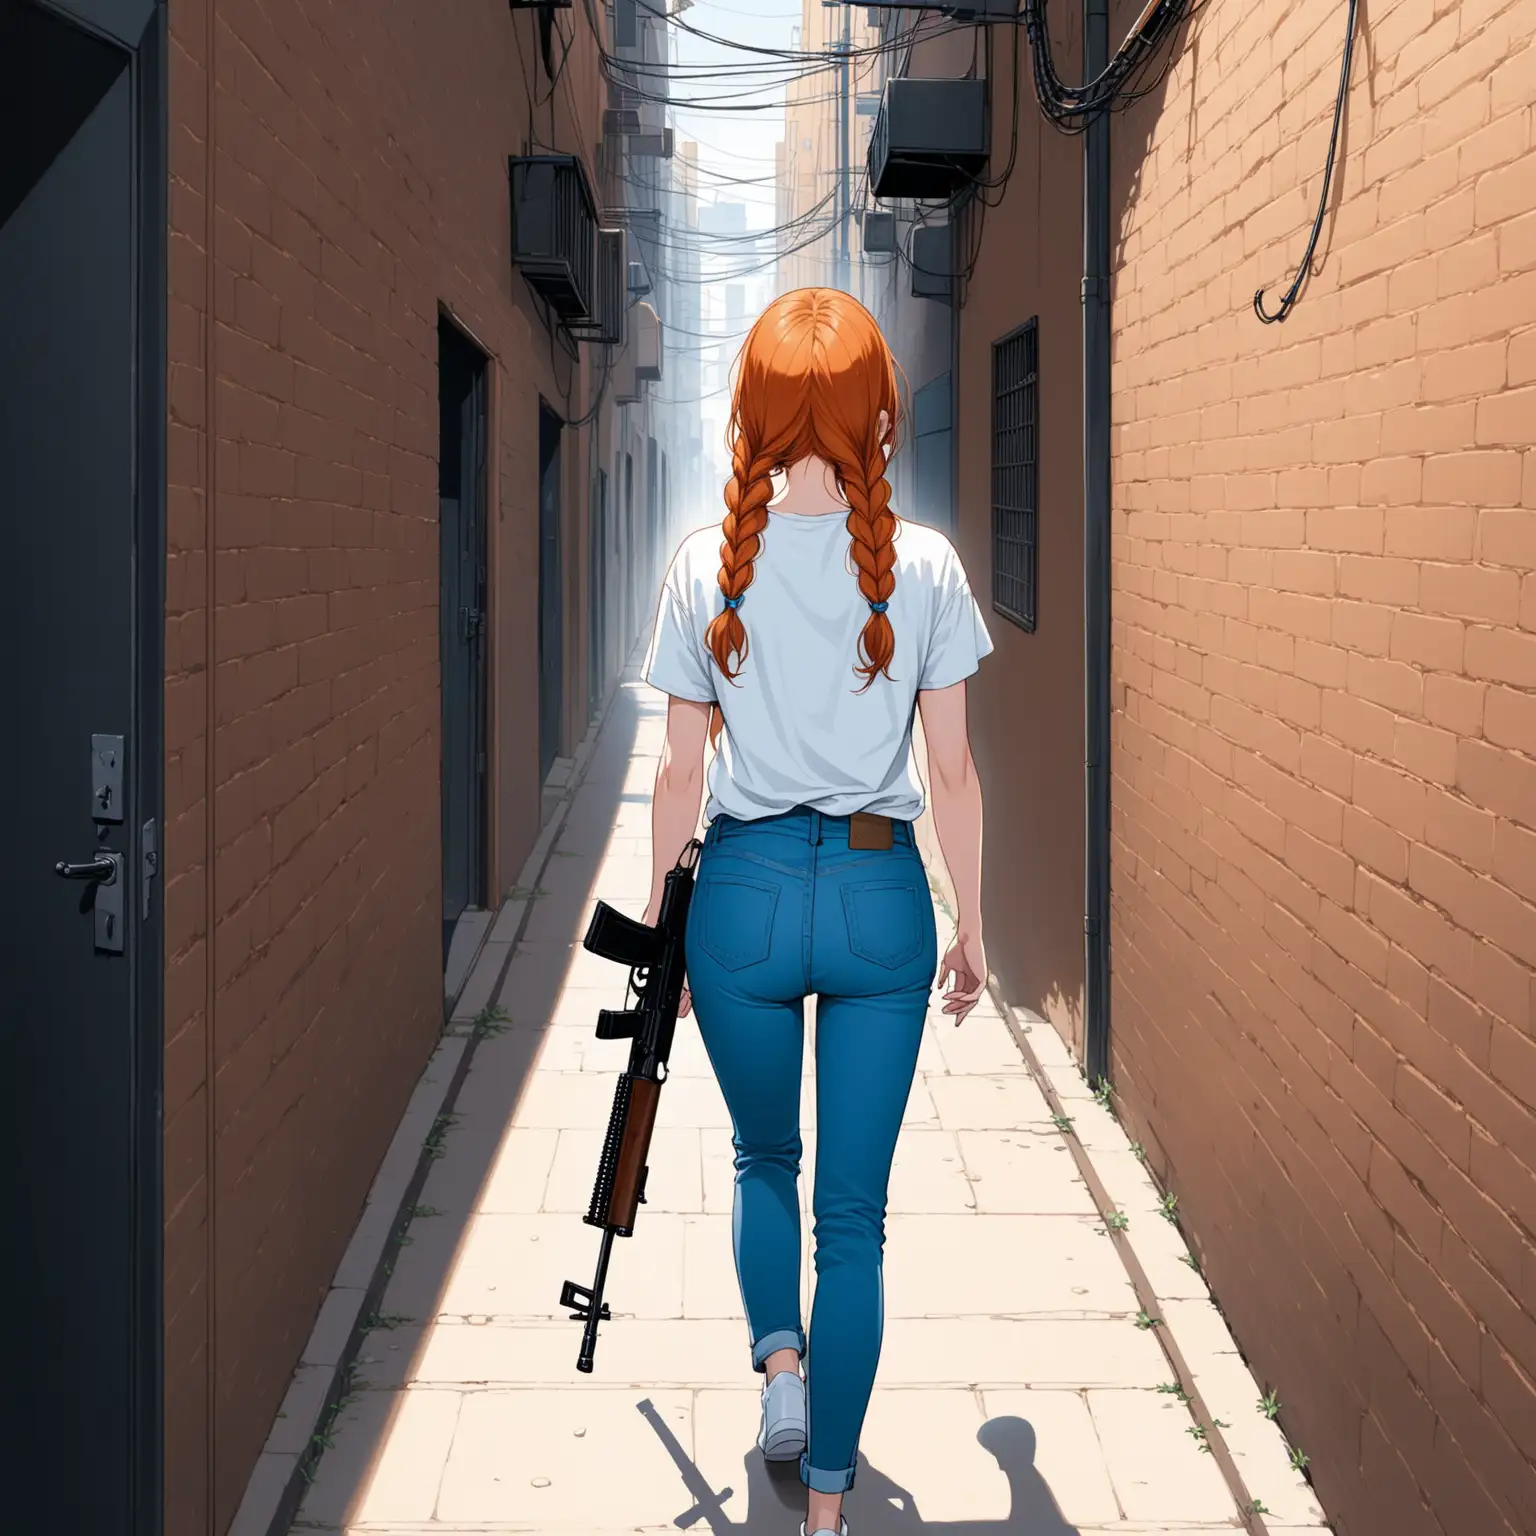 a adult woman with   ginger hair  in two braids  has blue eyeswearing a  white  t shirt and and  jeans , shes holding a rifle ,  a blue bow is at the tip of her braids. she's walking  in an alley 